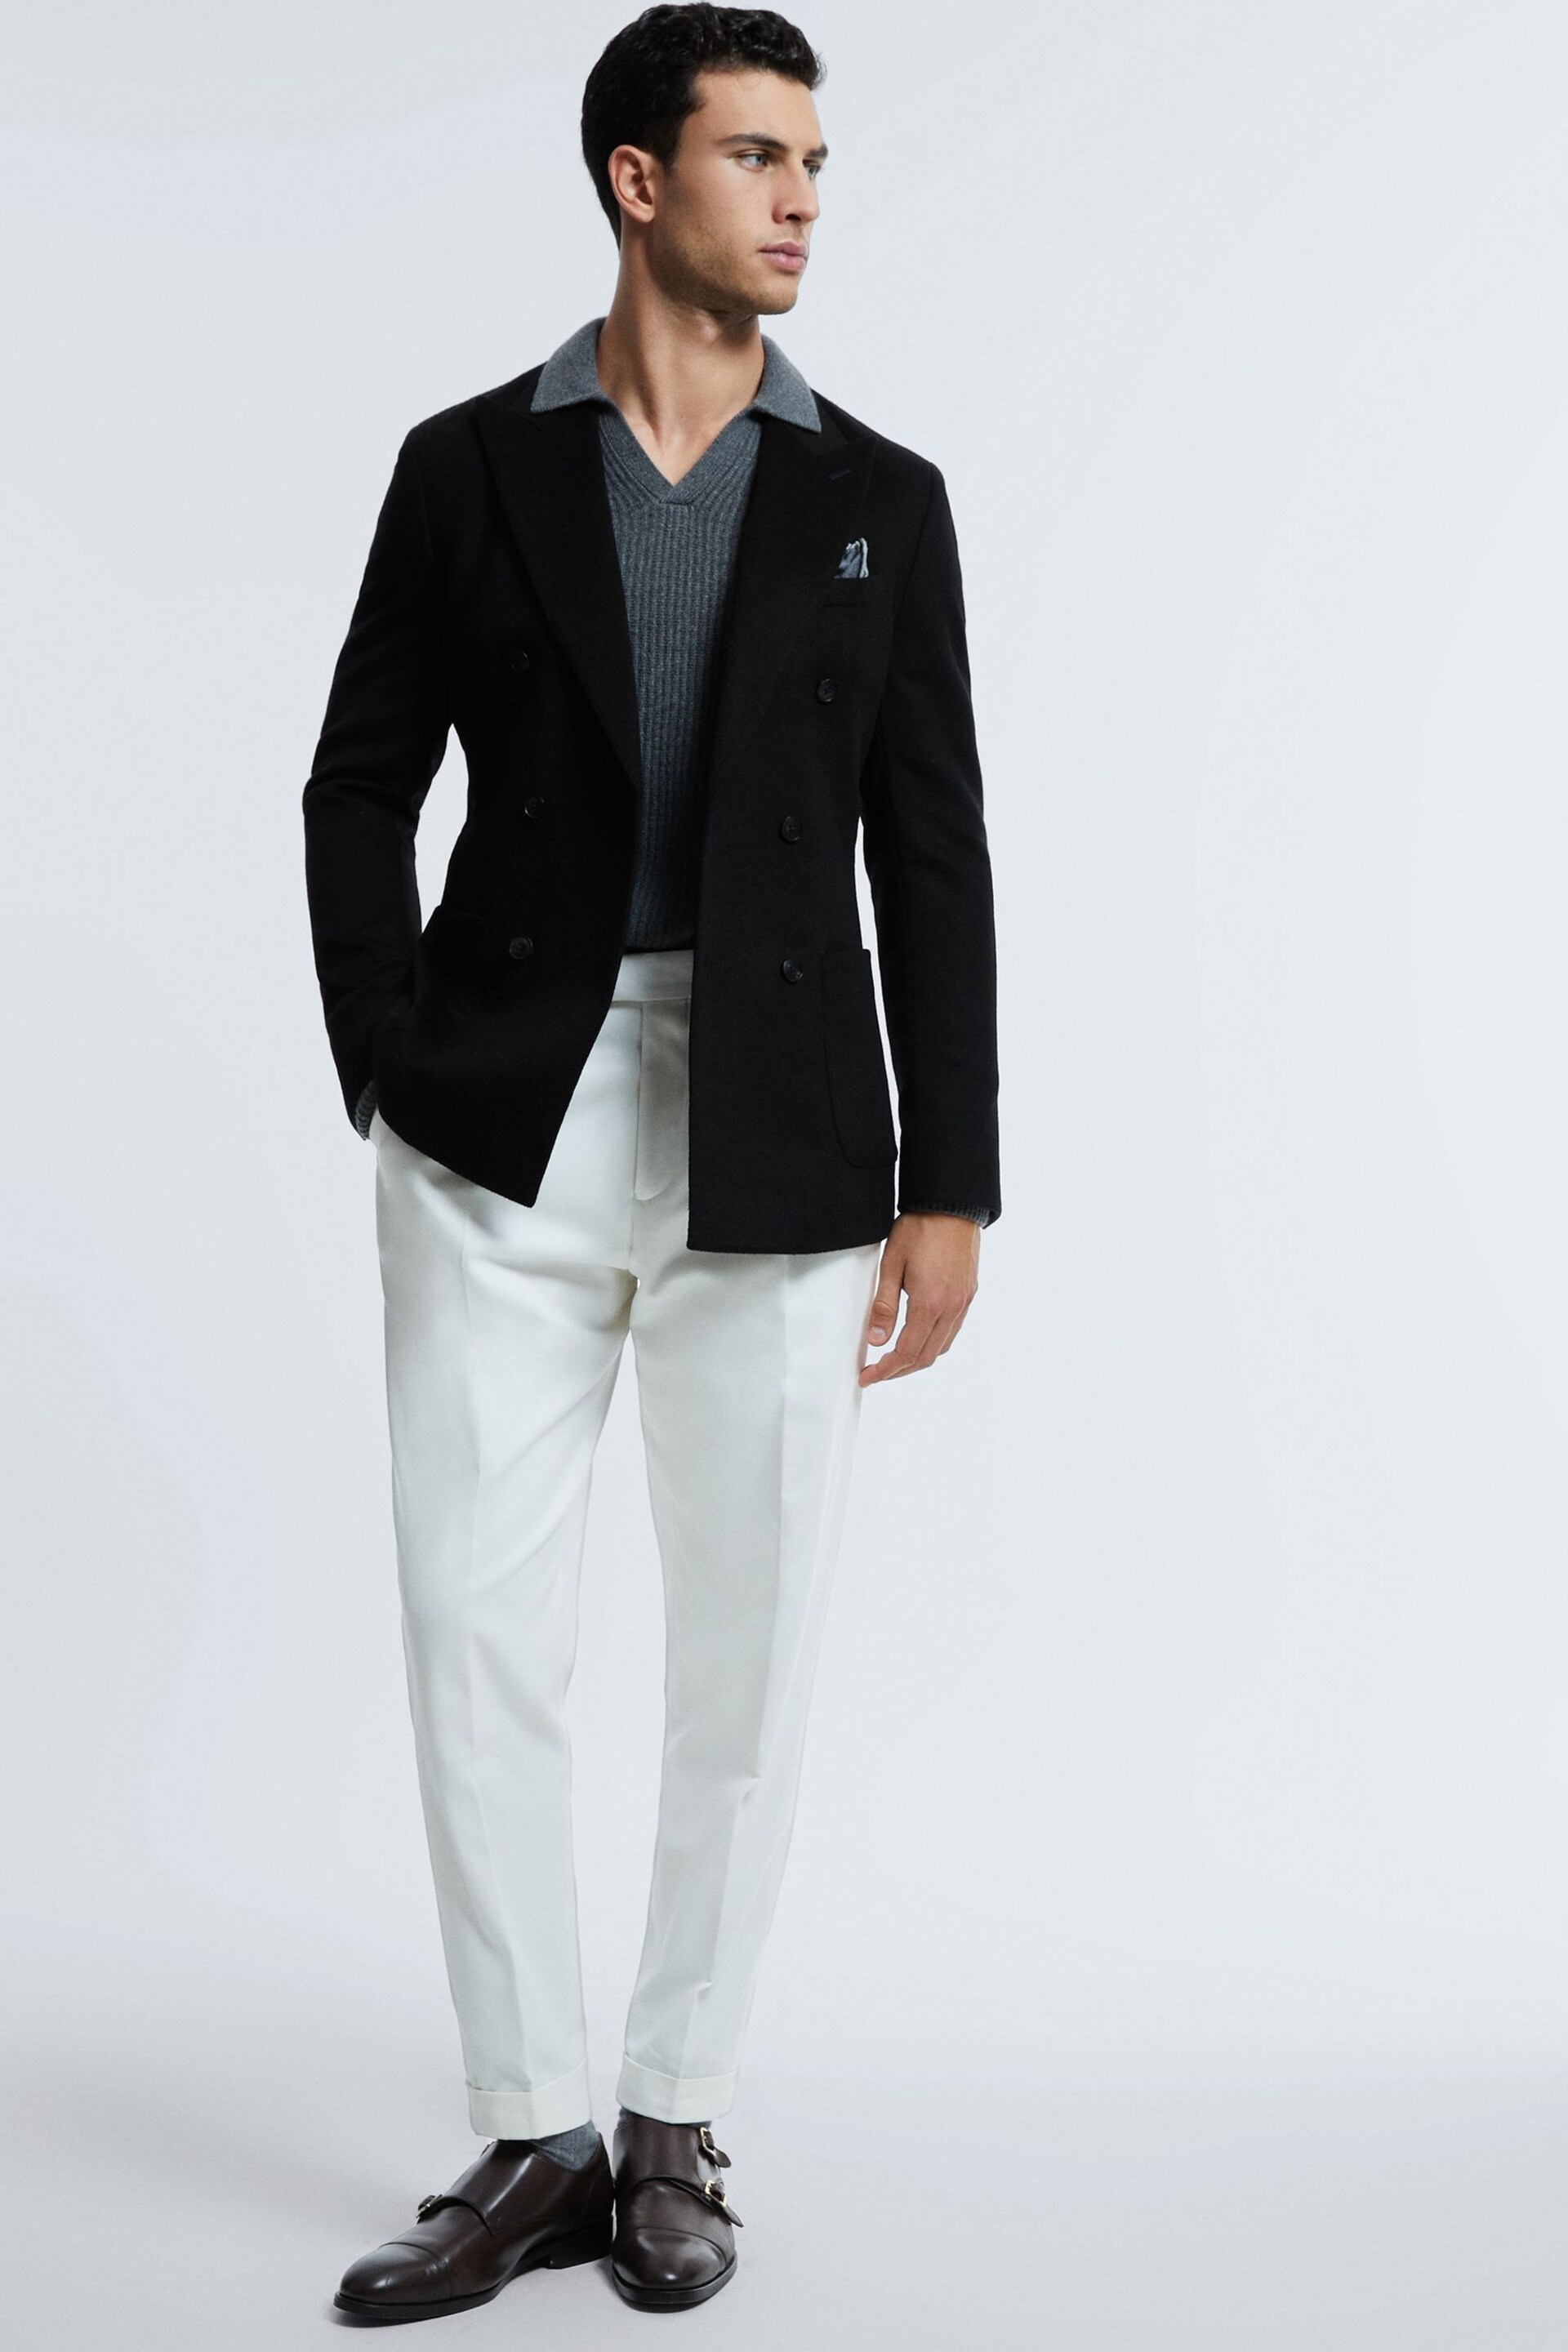 Atelier Cashmere Modern Fit Double Breasted Blazer - Image 3 of 7